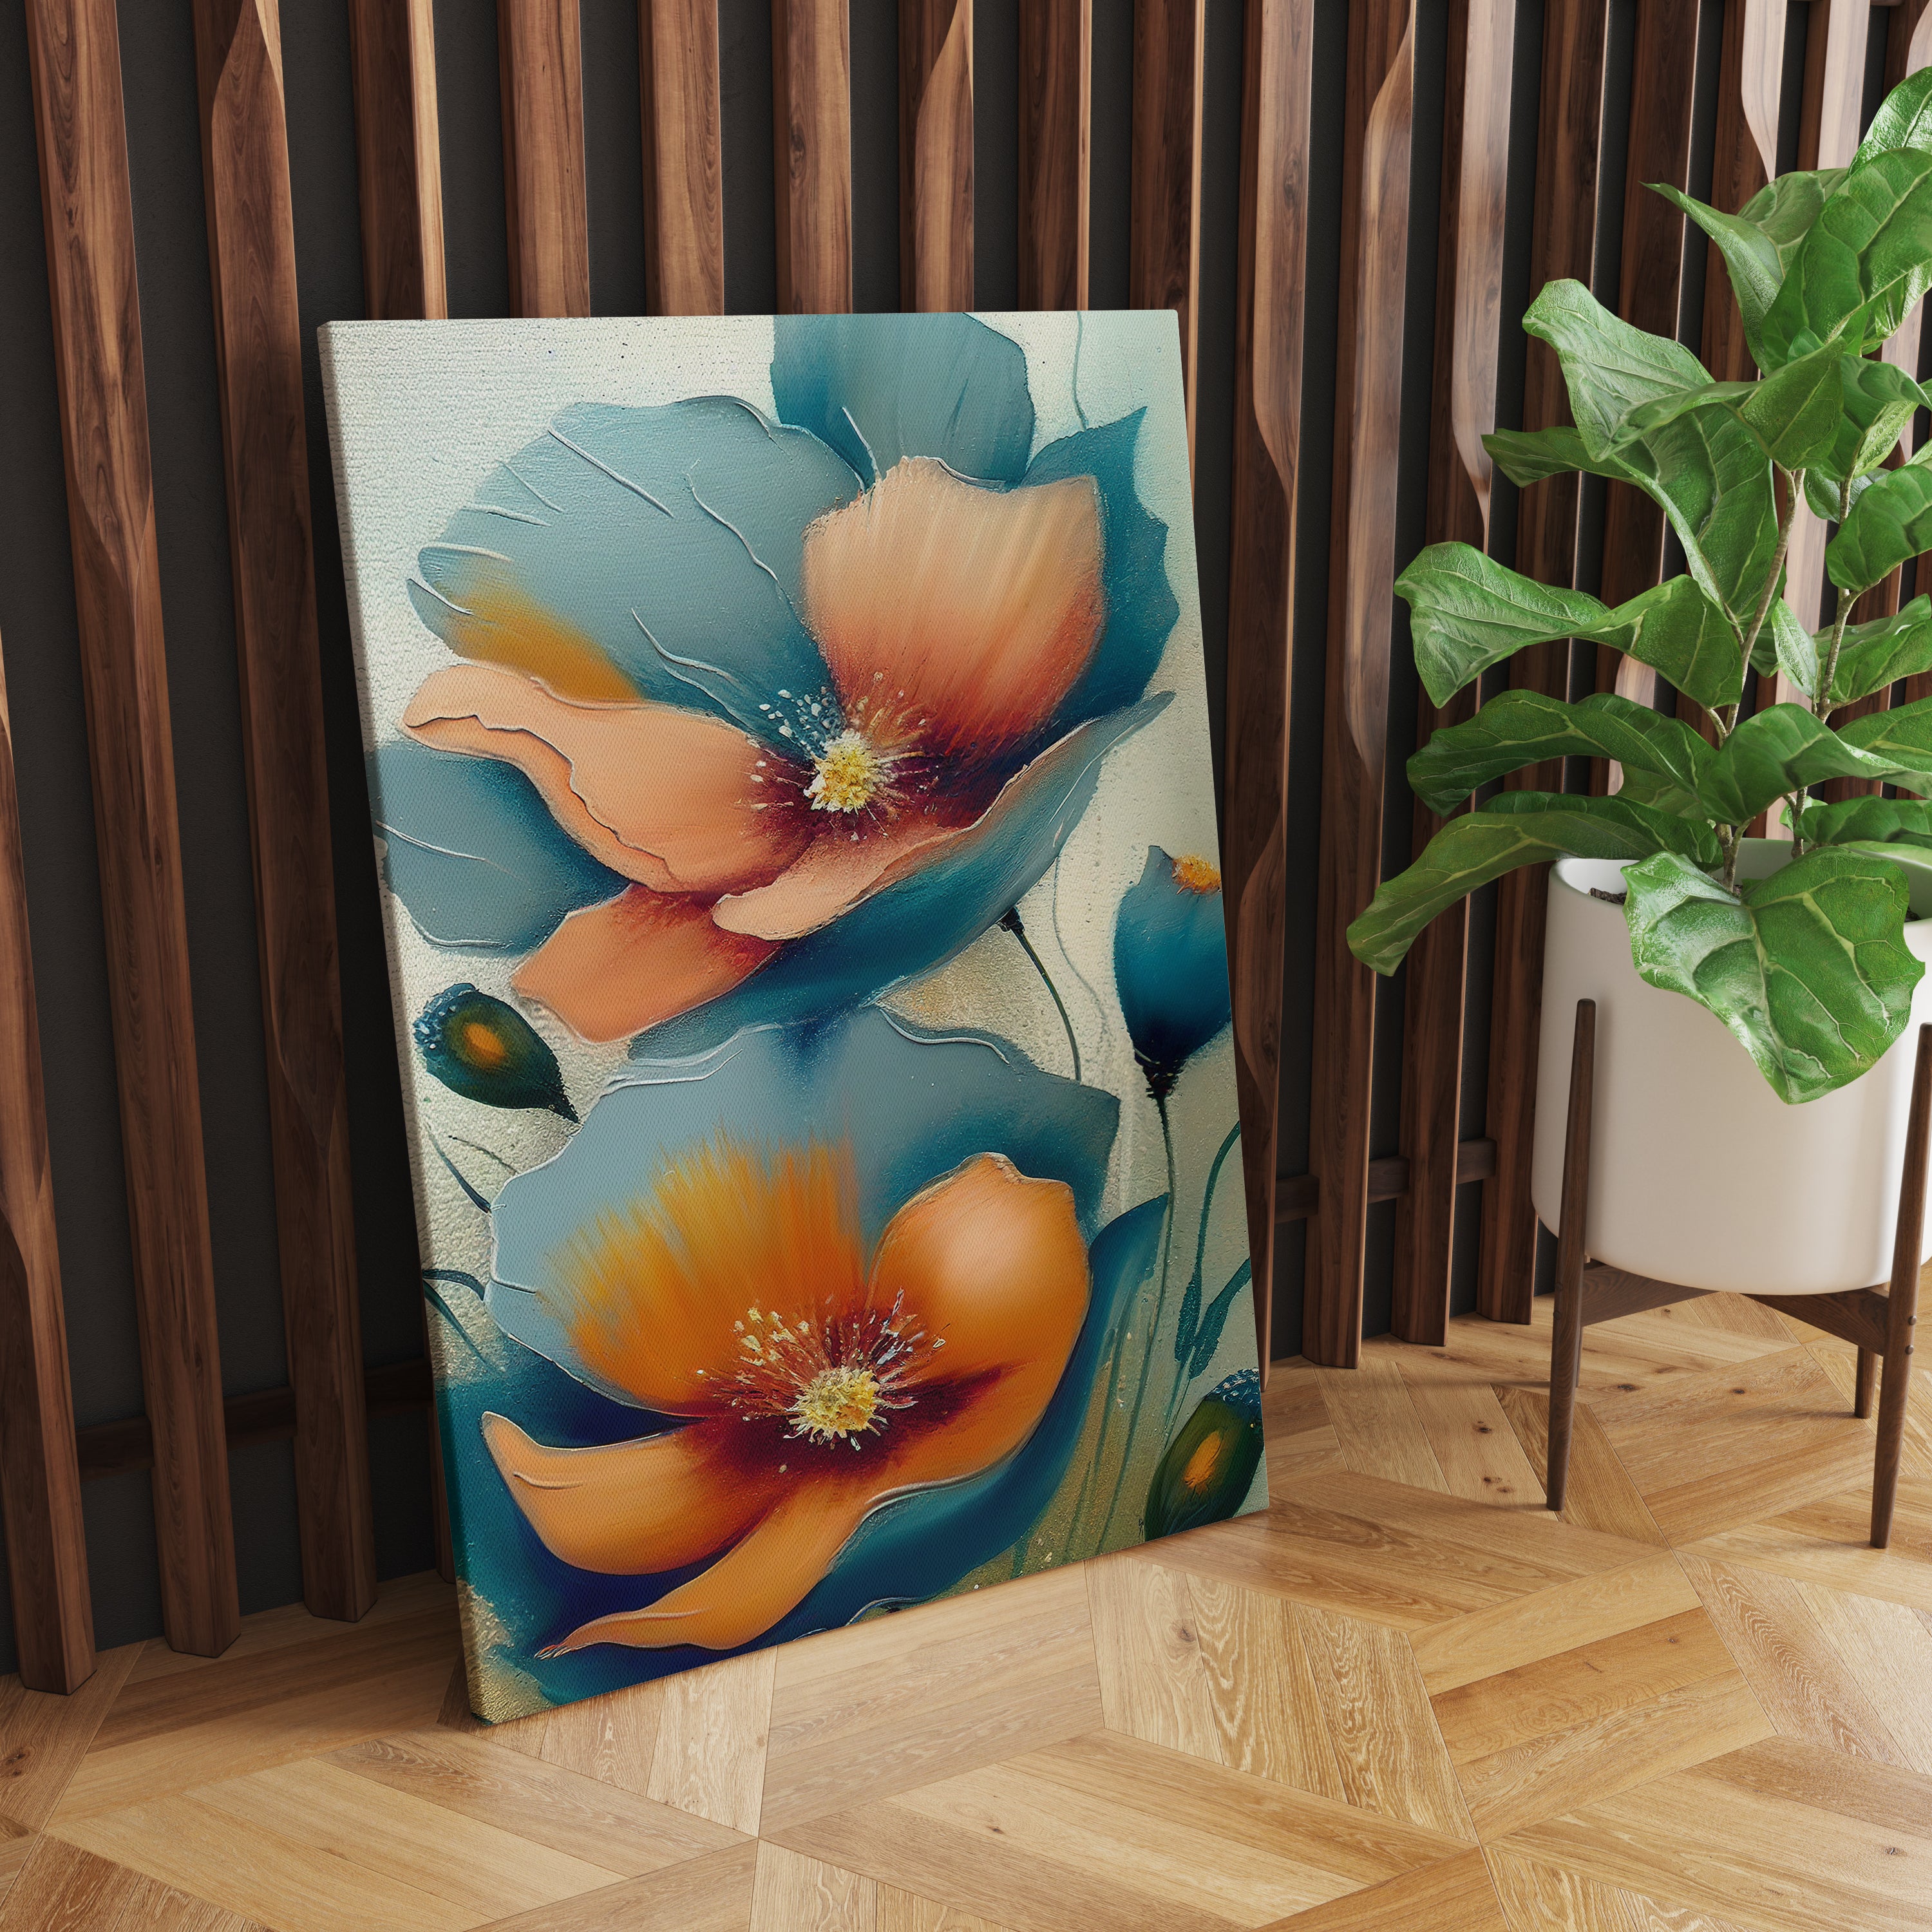 Modern Abstract Art Flowers Canvas Wall Painting